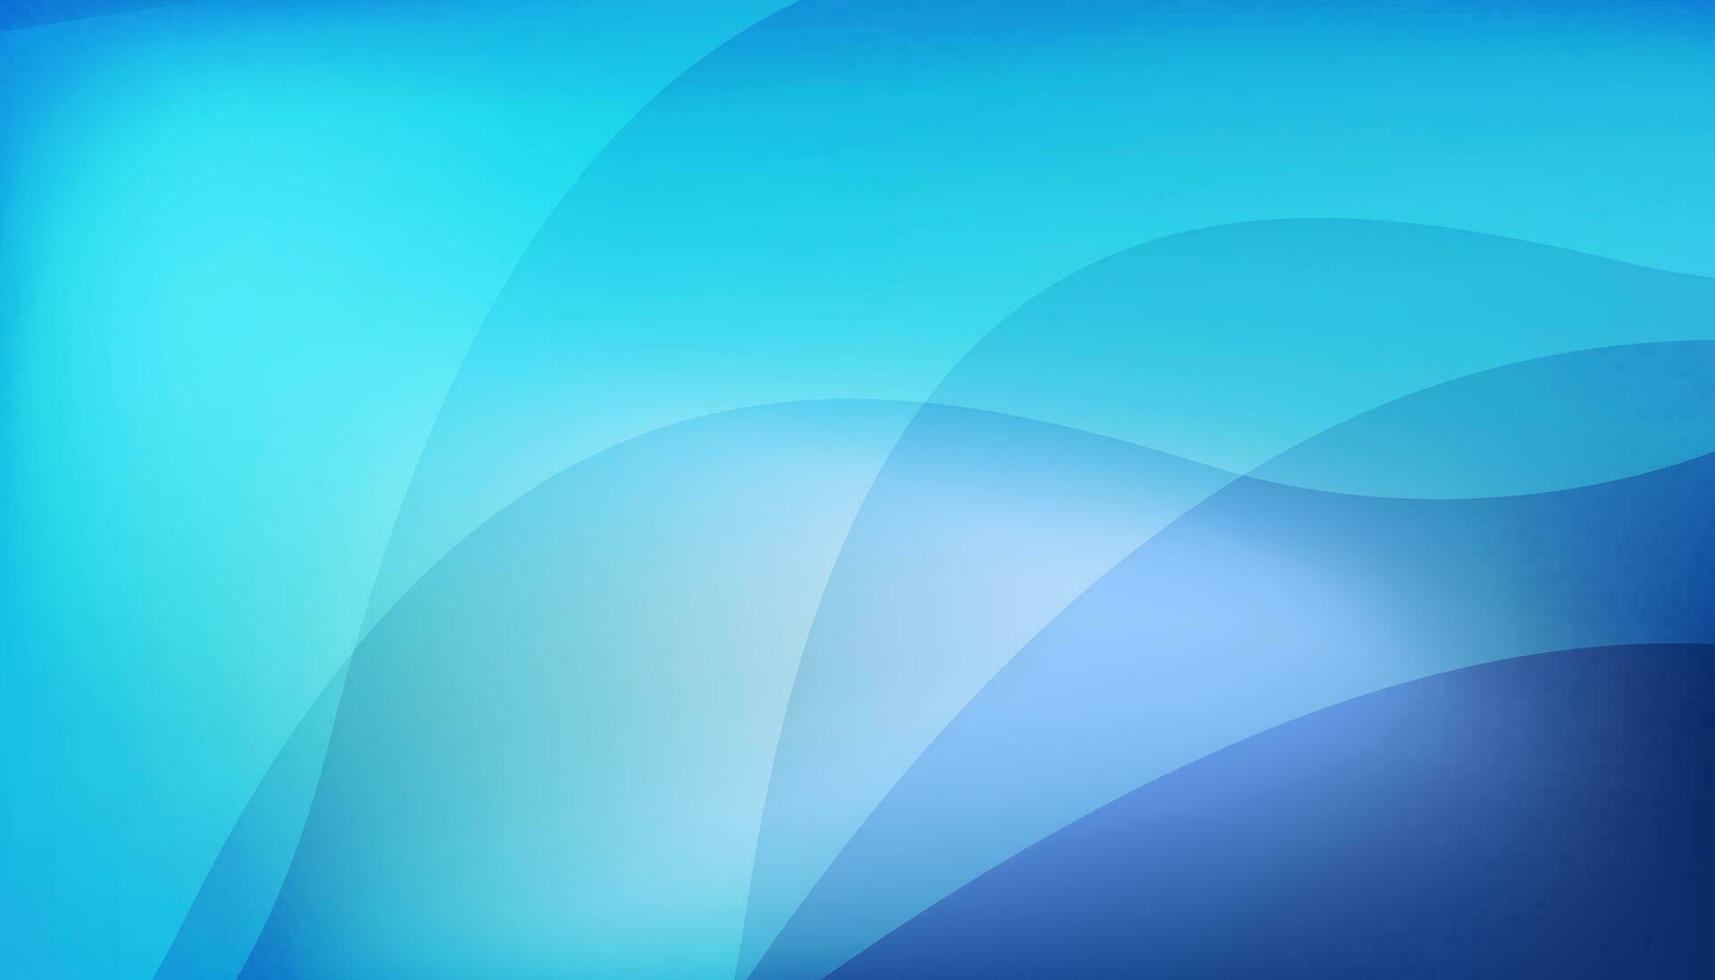 Abstract transparant wave shape blue color background vector